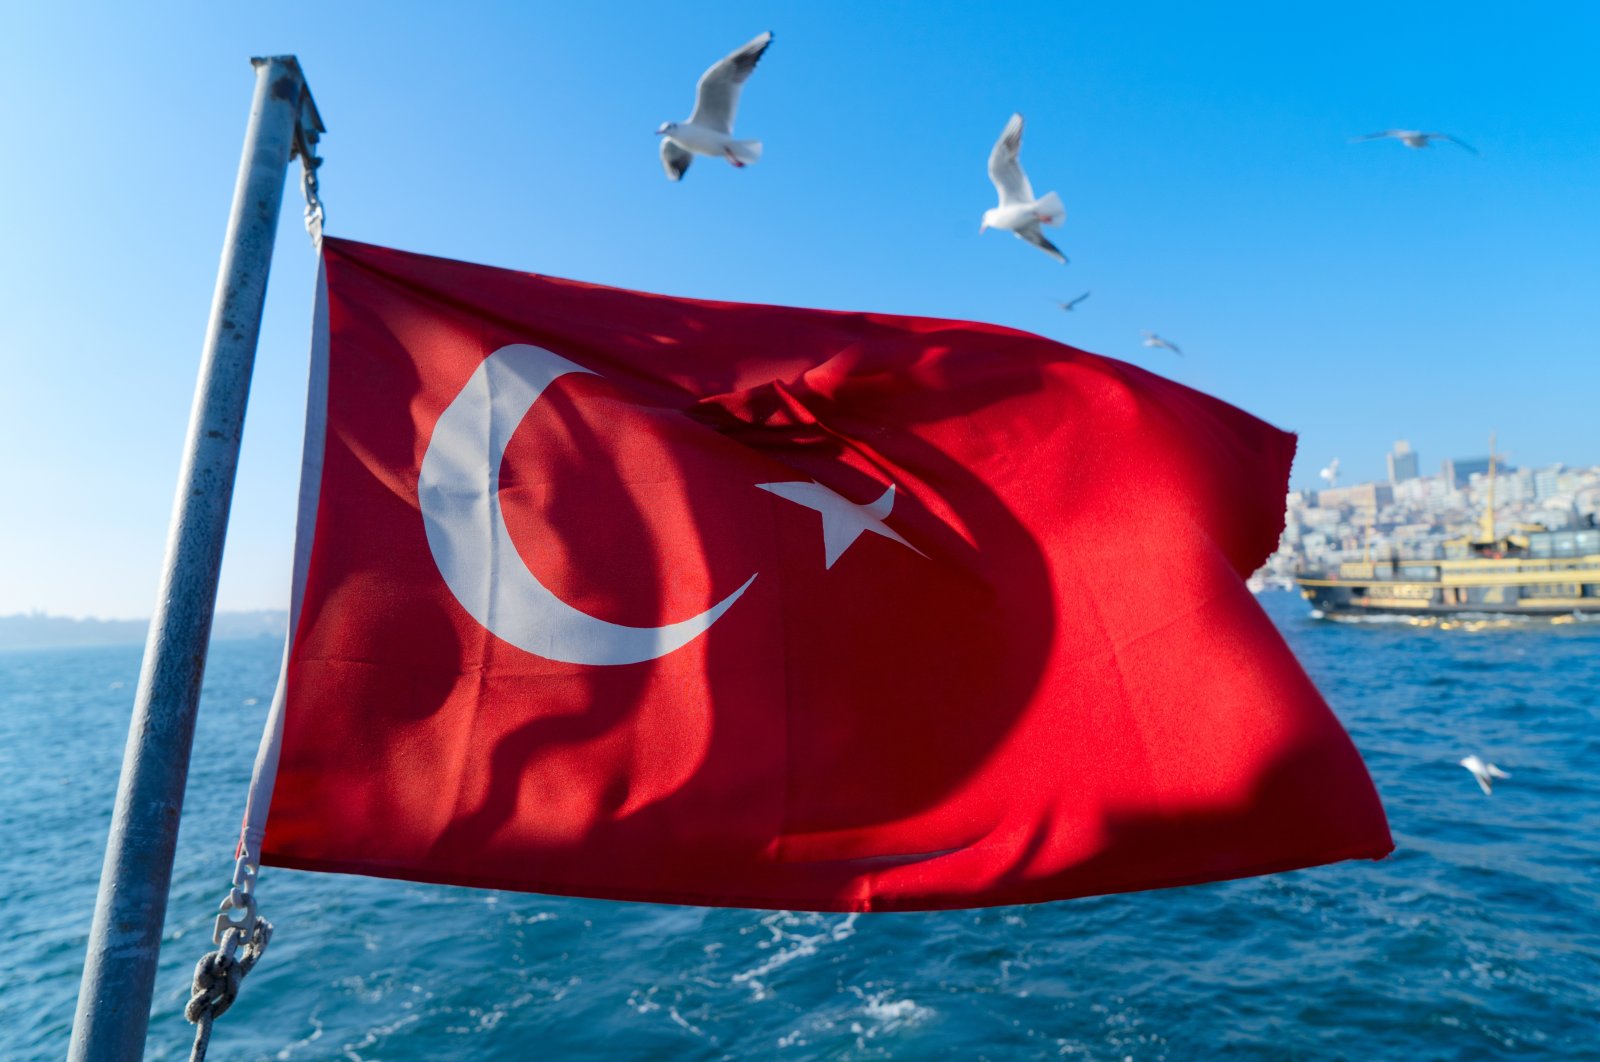 The Turkish flag hangs in the air on a Bosporus ferry, Istanbul, Turkey, April 28, 2022. (Photo by Shutterstock)